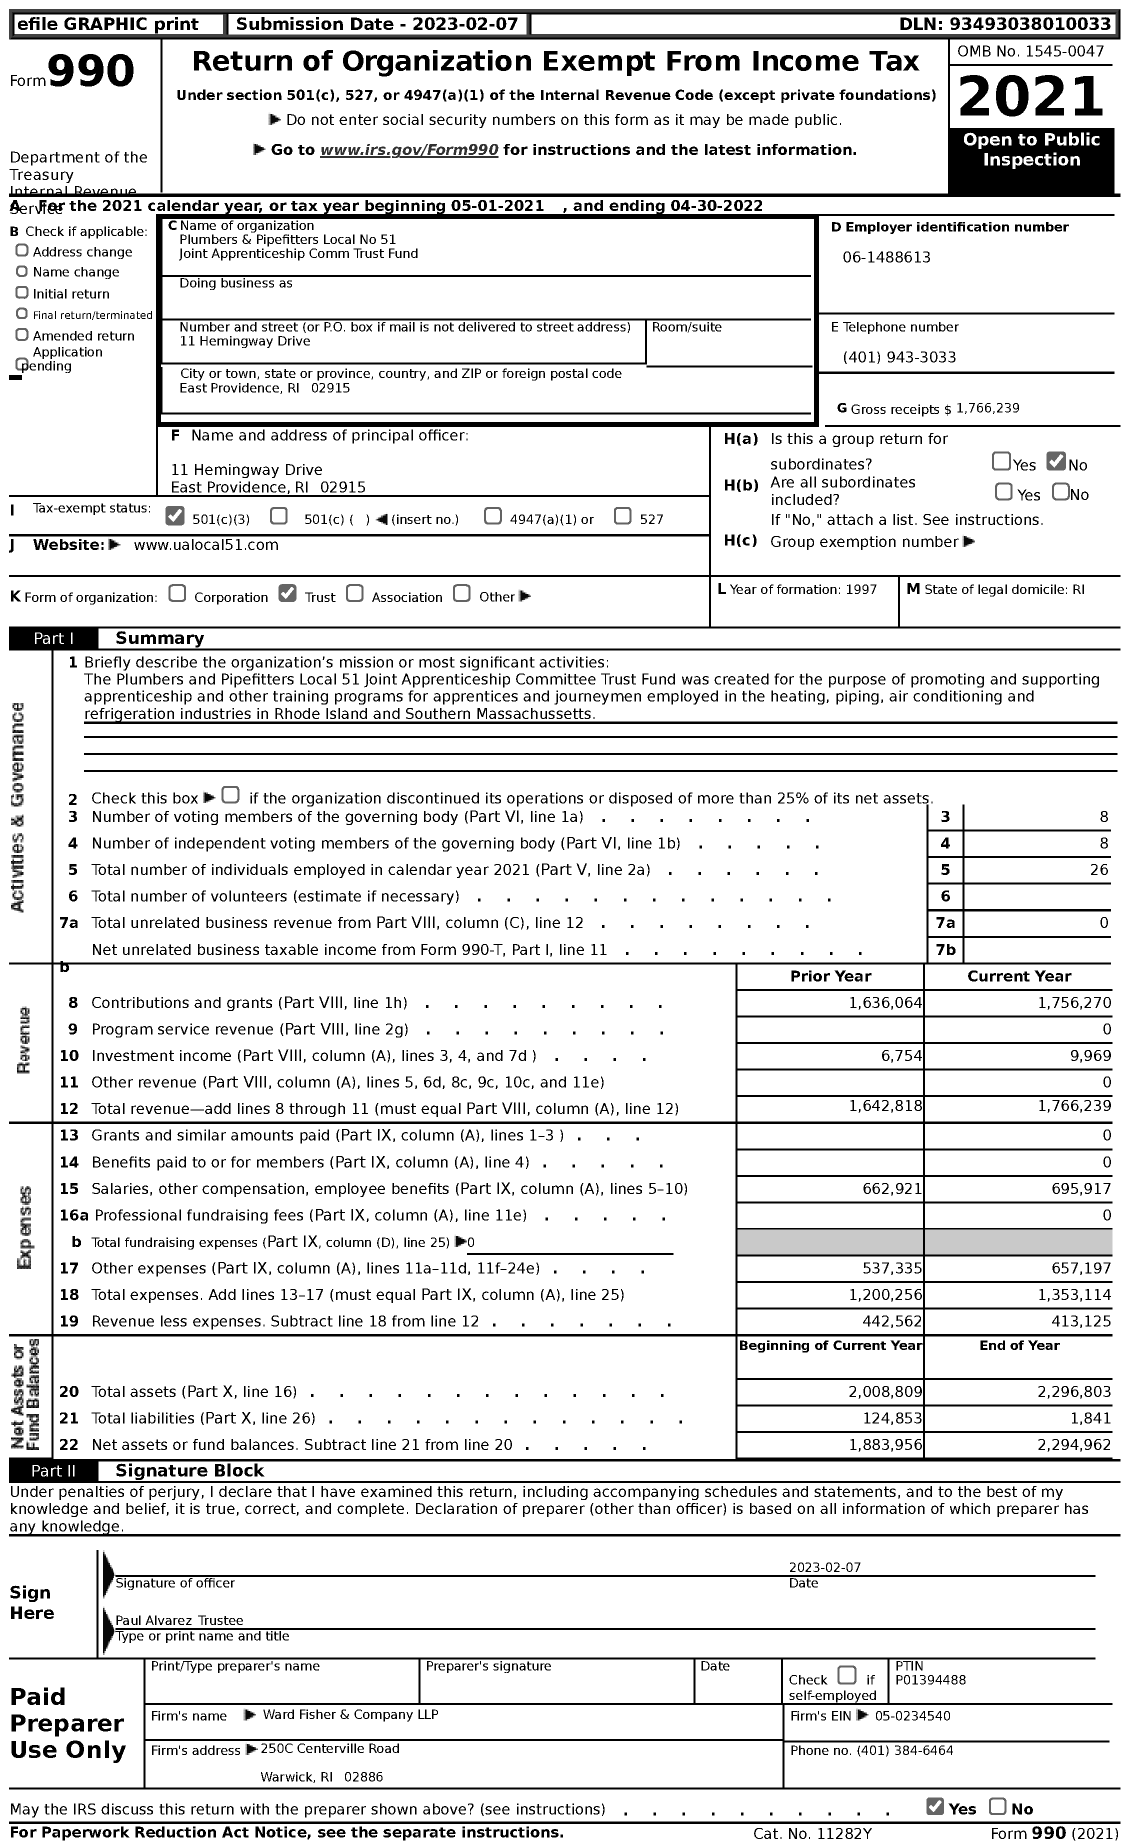 Image of first page of 2021 Form 990 for Plumbers & Pipefitters Local No 51 Joint Apprenticeship Comm Trust Fund